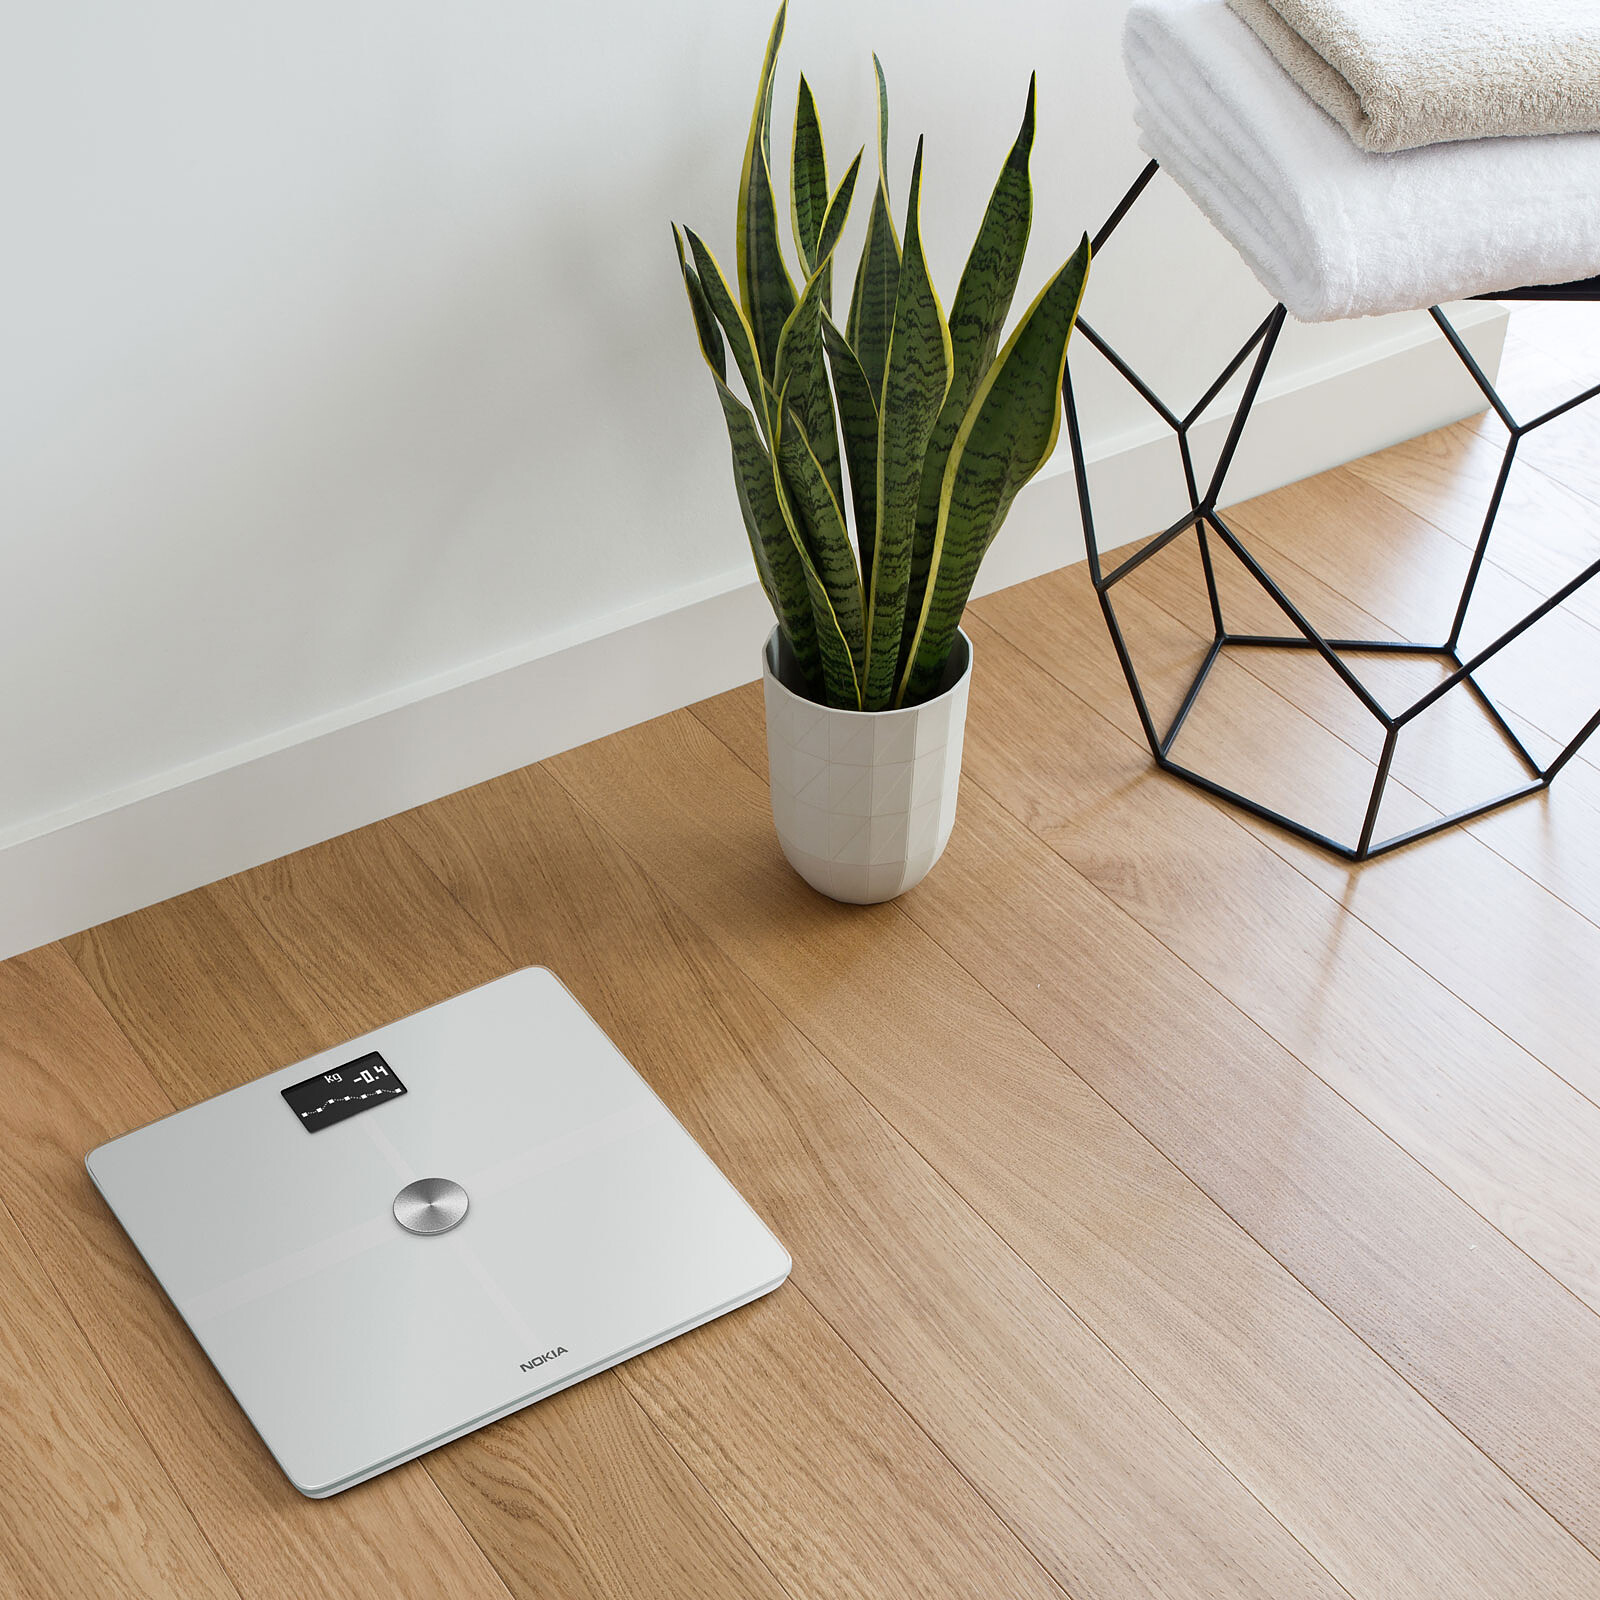 Withings Nokia Body White Smart scale LDLC 3-year warranty